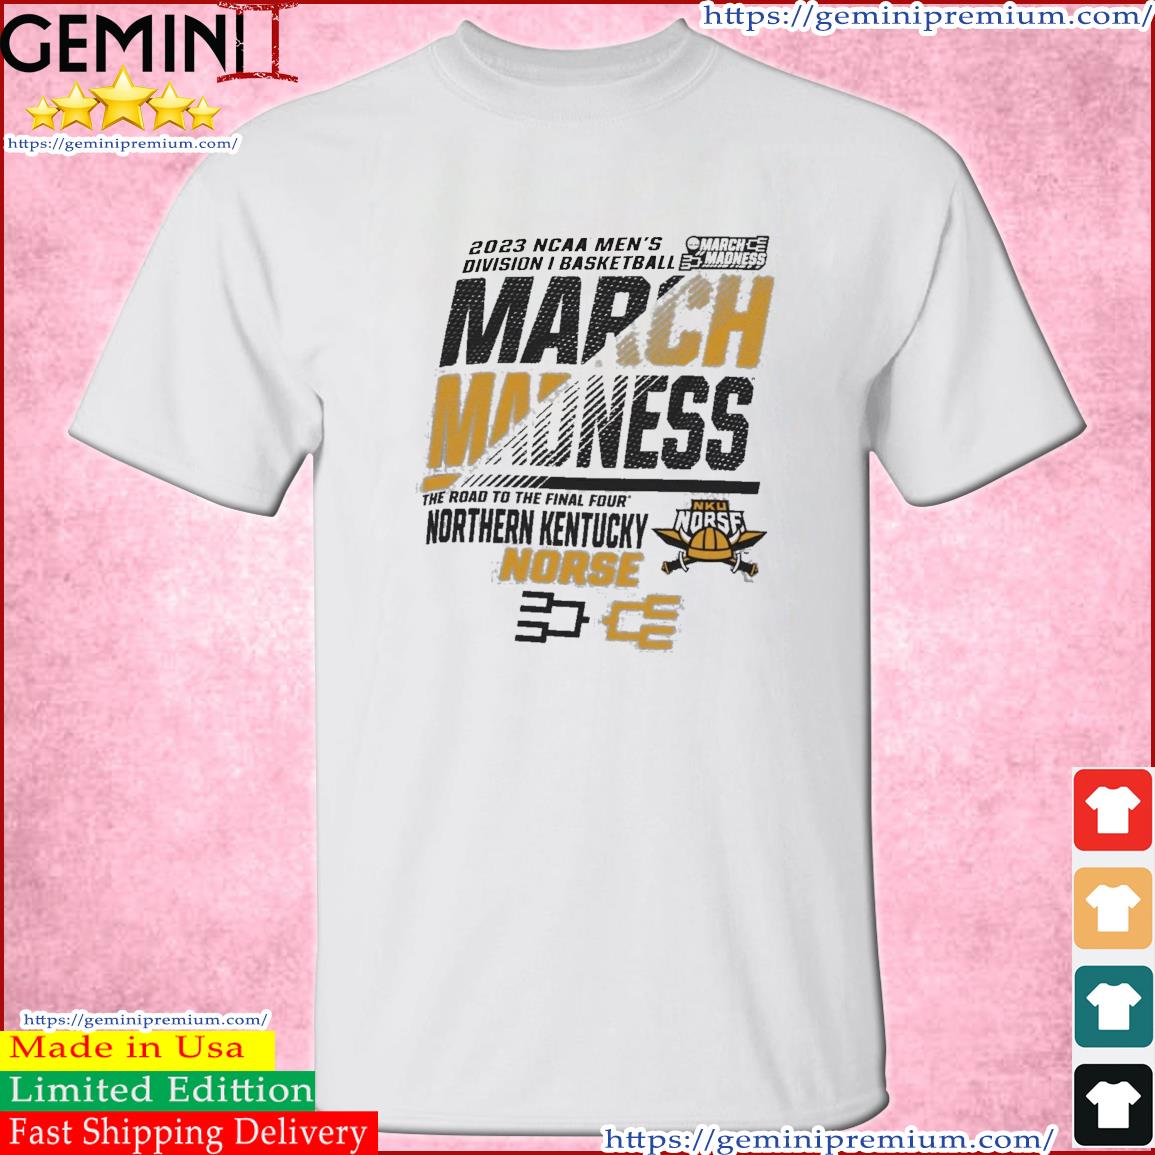 Northwestern Kentucky Men's Basketball 2023 NCAA March Madness The Road To Final Four Shirt